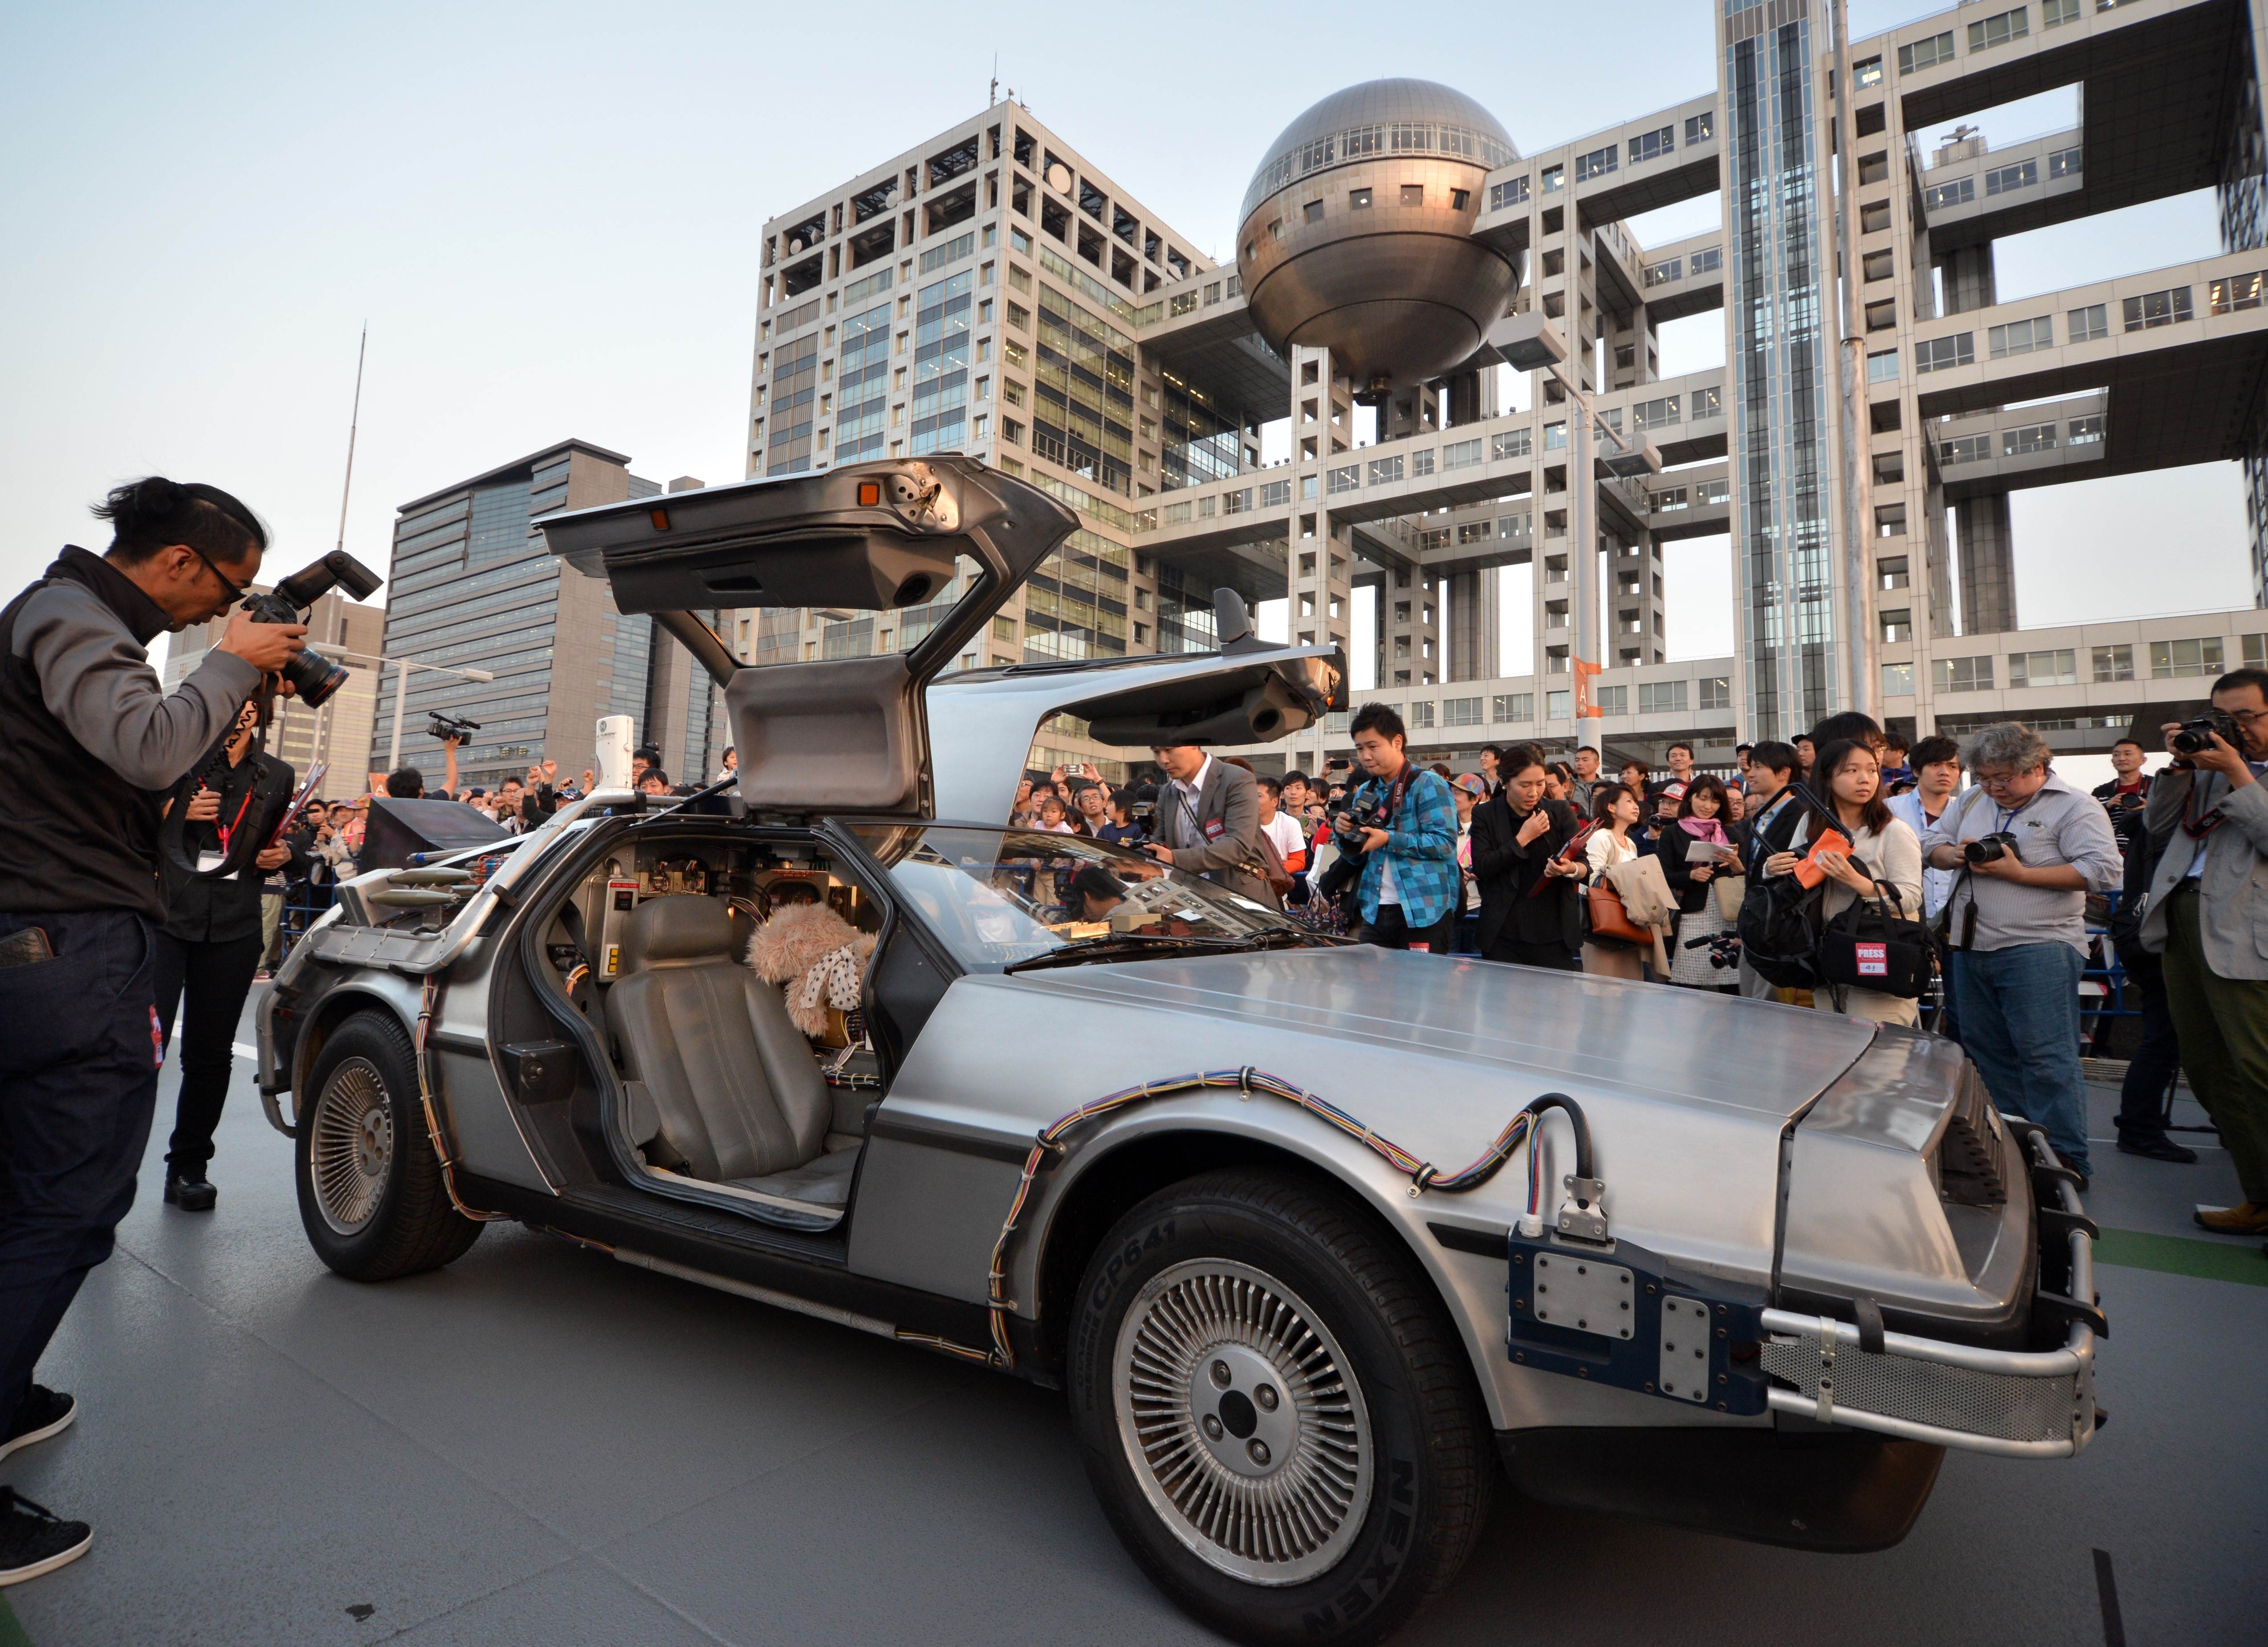 A 'Back to the Future'-style DeLorean, powered by methanol bio-fuel made from recycled clothing produced by a Japanese venture, is displayed at a shopping complex in Tokyo's Odaiba area Wednesday, the 30th anniversary of the movie. | AFP-JIJI